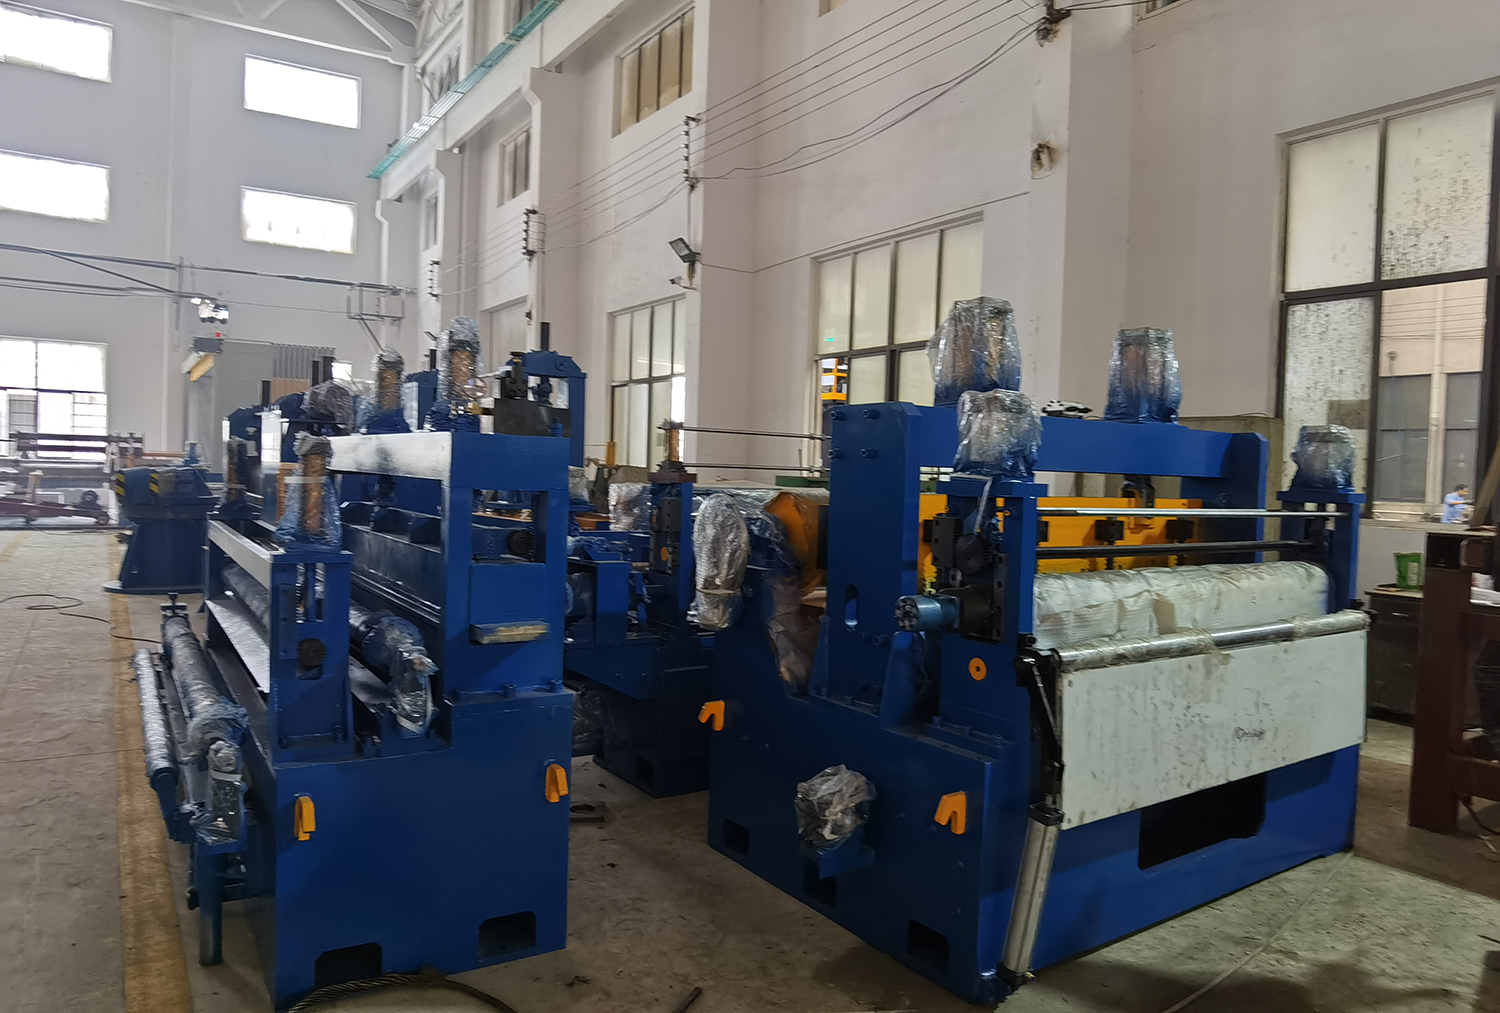 6 x 1700 Double Slitters Slitting Machine to Russia